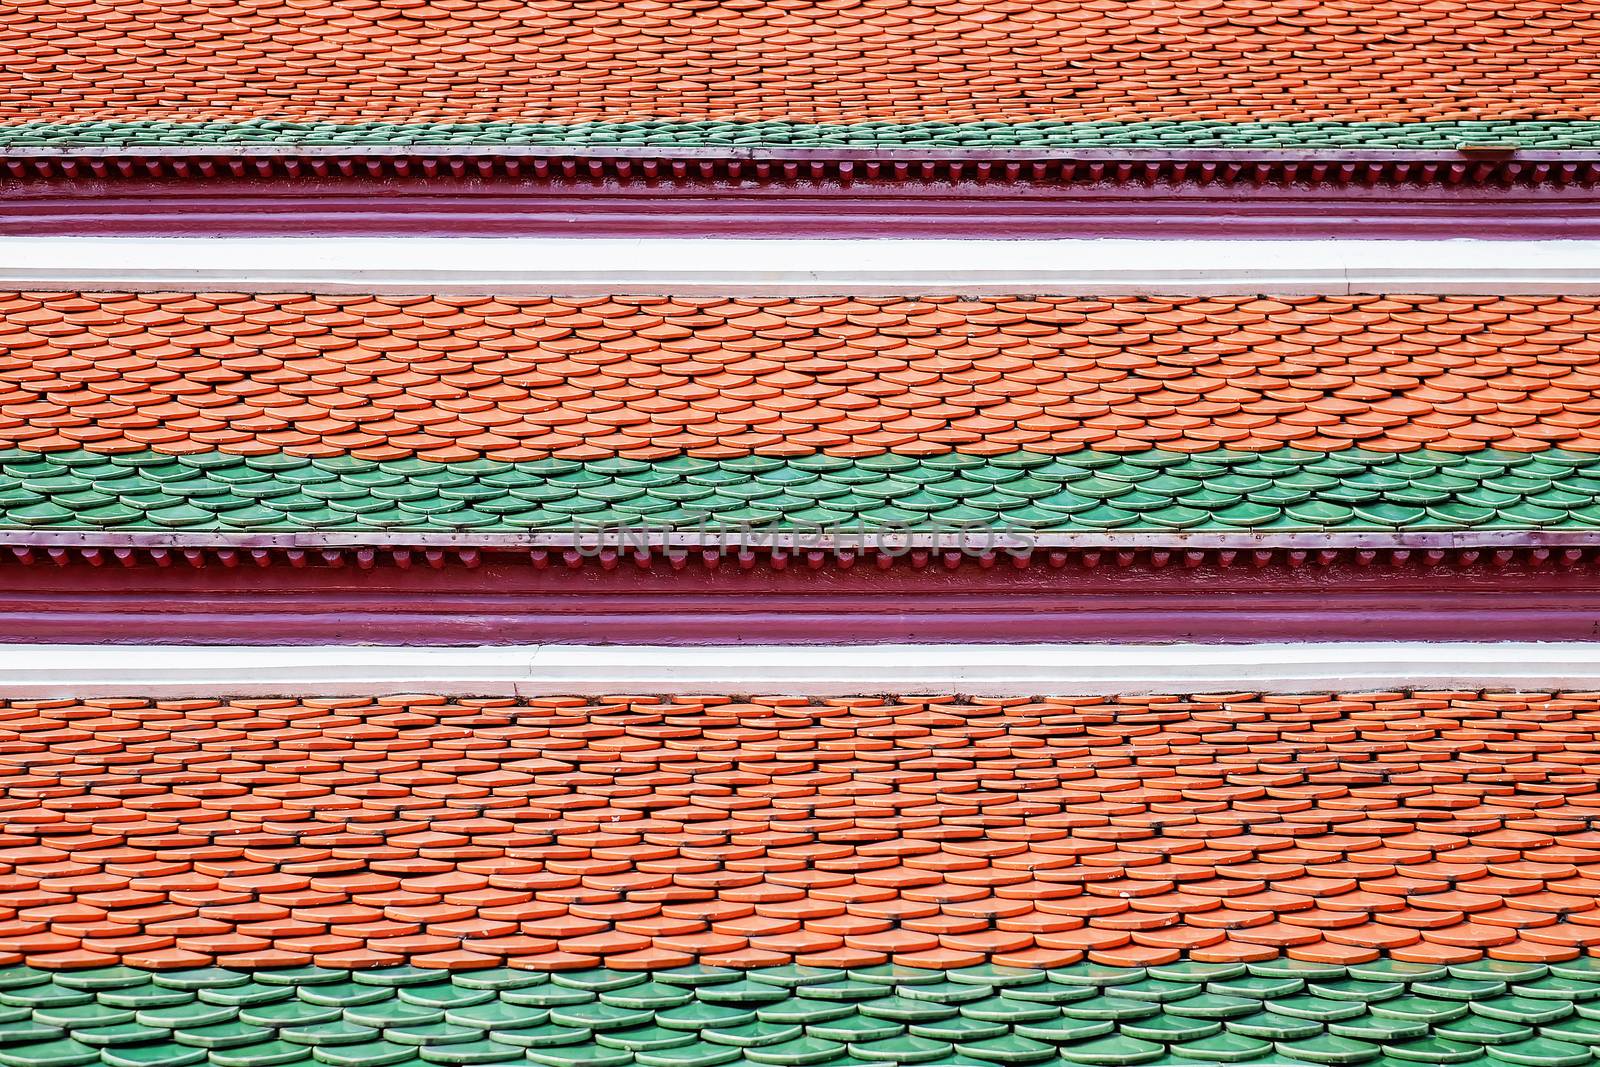 Rooftile pattern yellow green and red